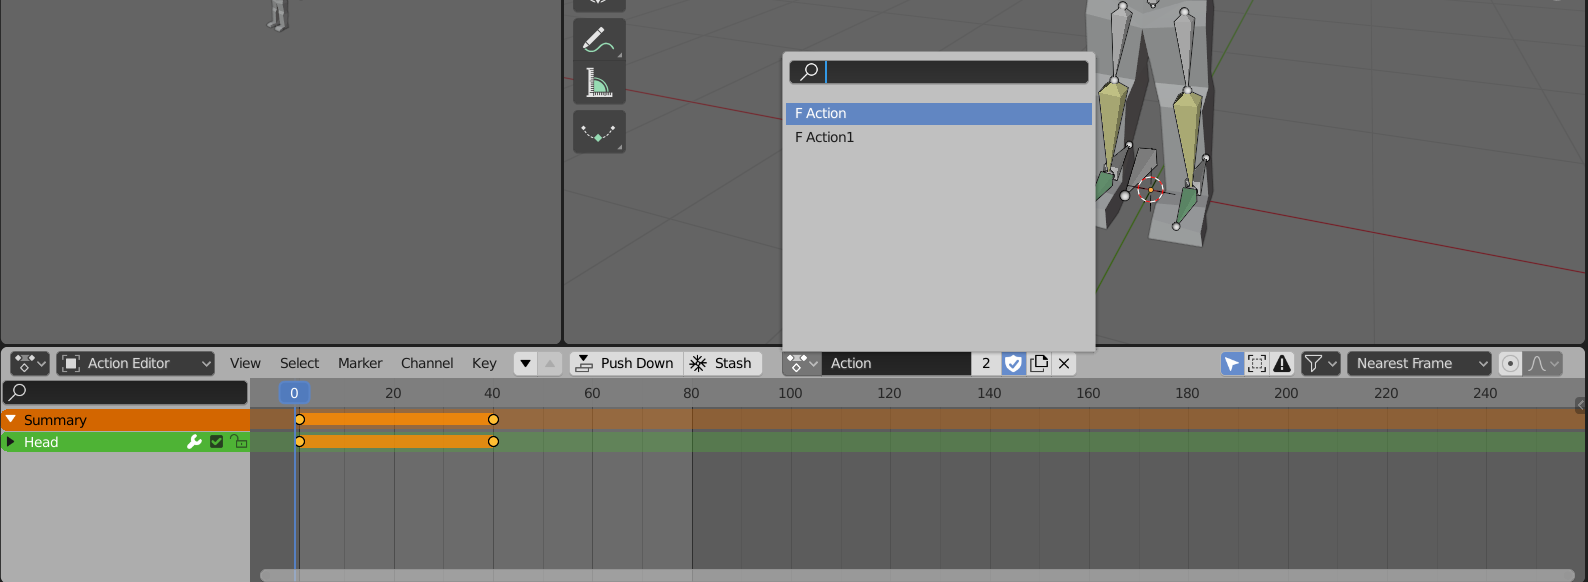 Blender Action Editor window with the 